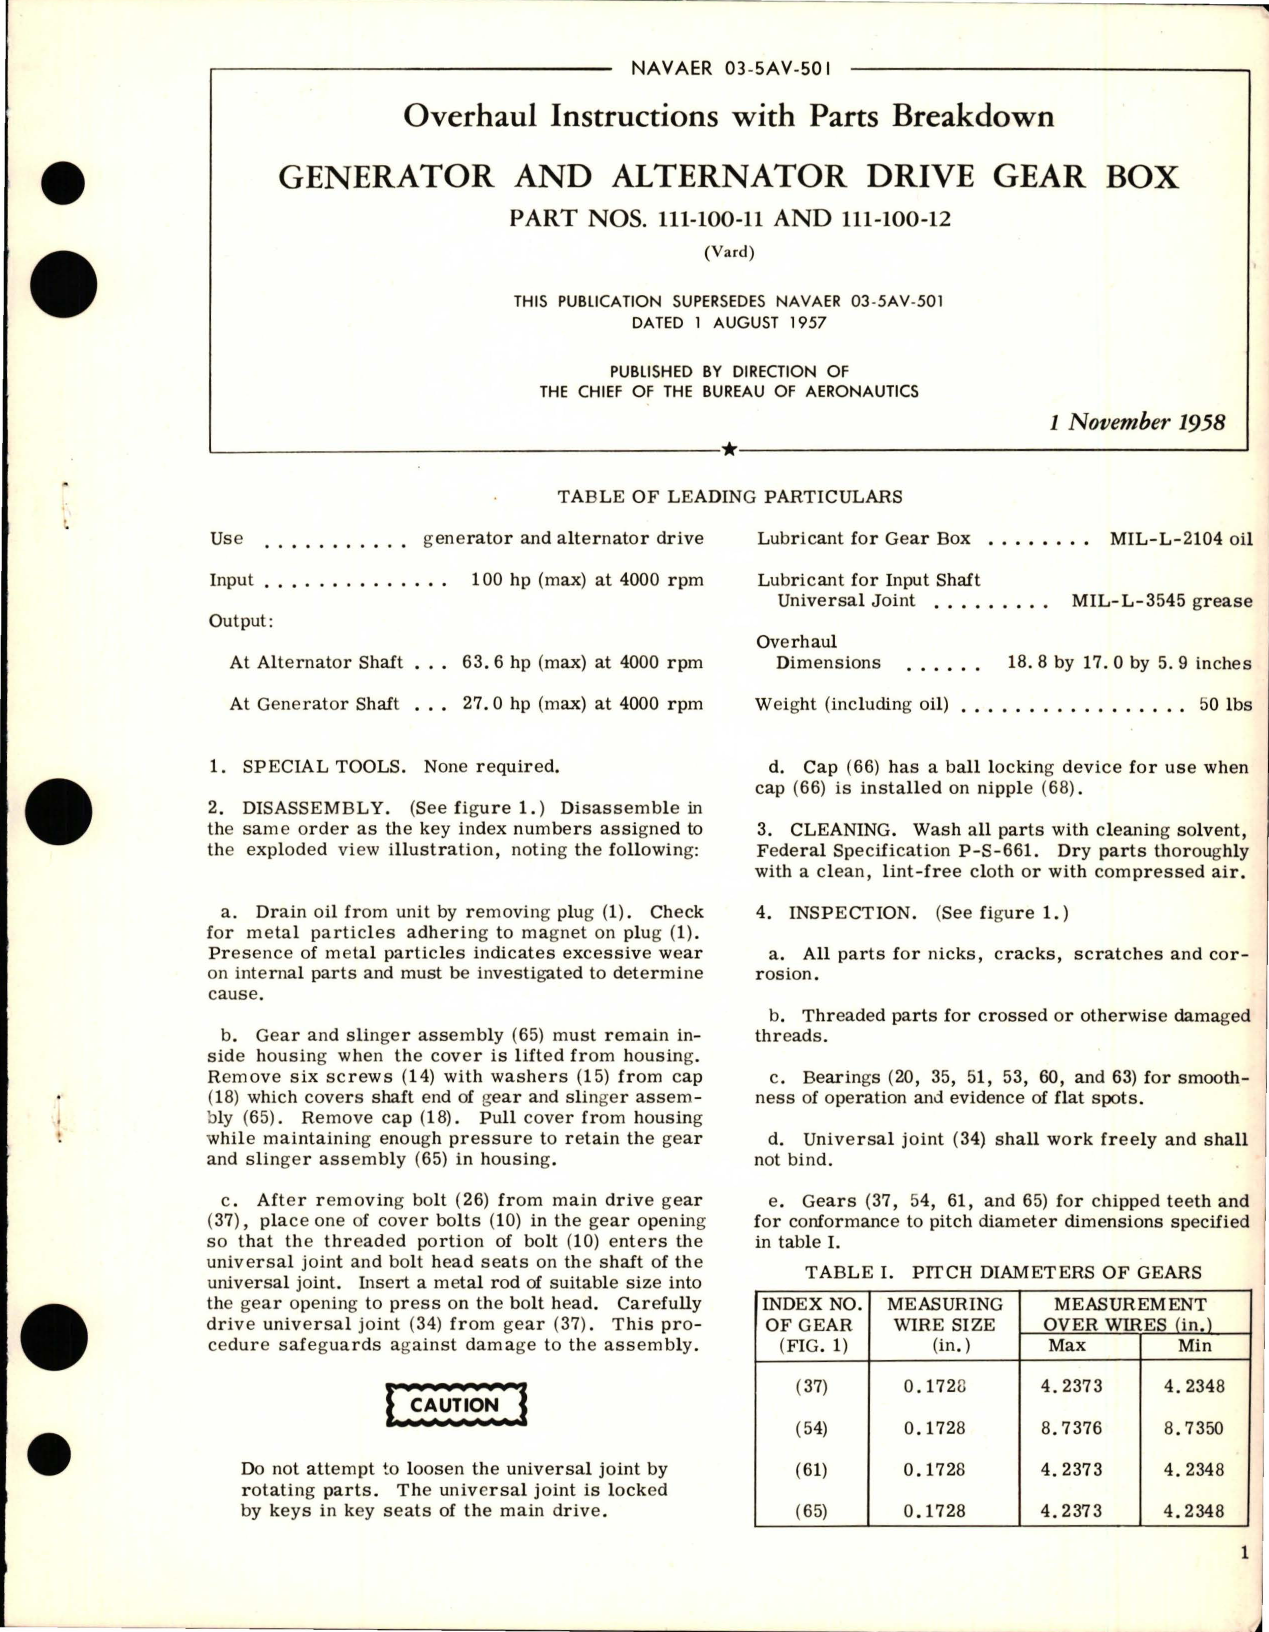 Sample page 1 from AirCorps Library document: Overhaul Instructions with Parts Breakdown for Generator and Alternator Drive Gear Box - Parts 111-100-11 and 111-100-12 